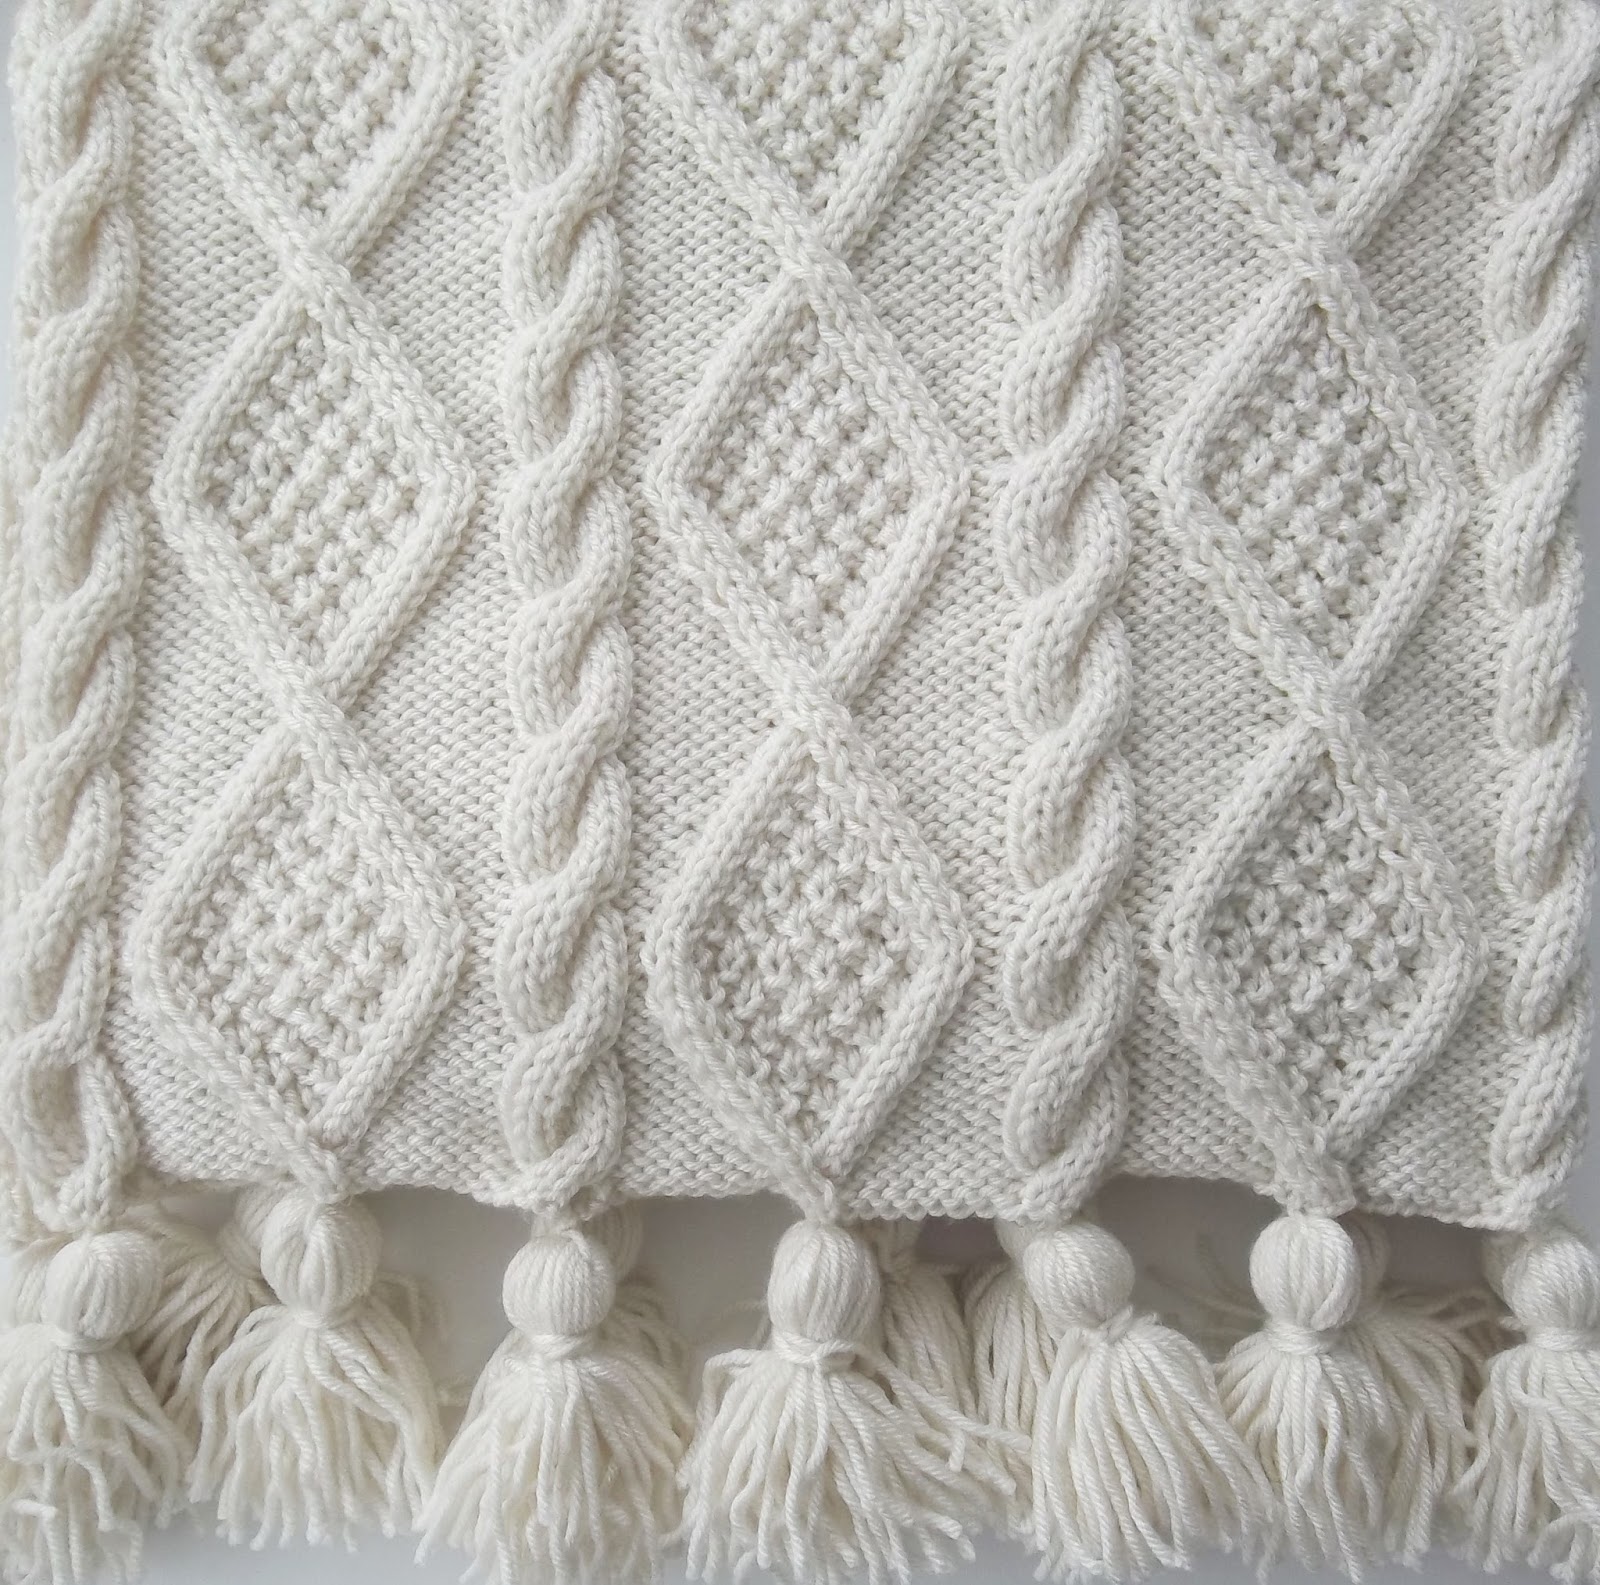 HAND KNITTING PATTERNS. ARAN. COWLS, HATS, SCARVES AND ...